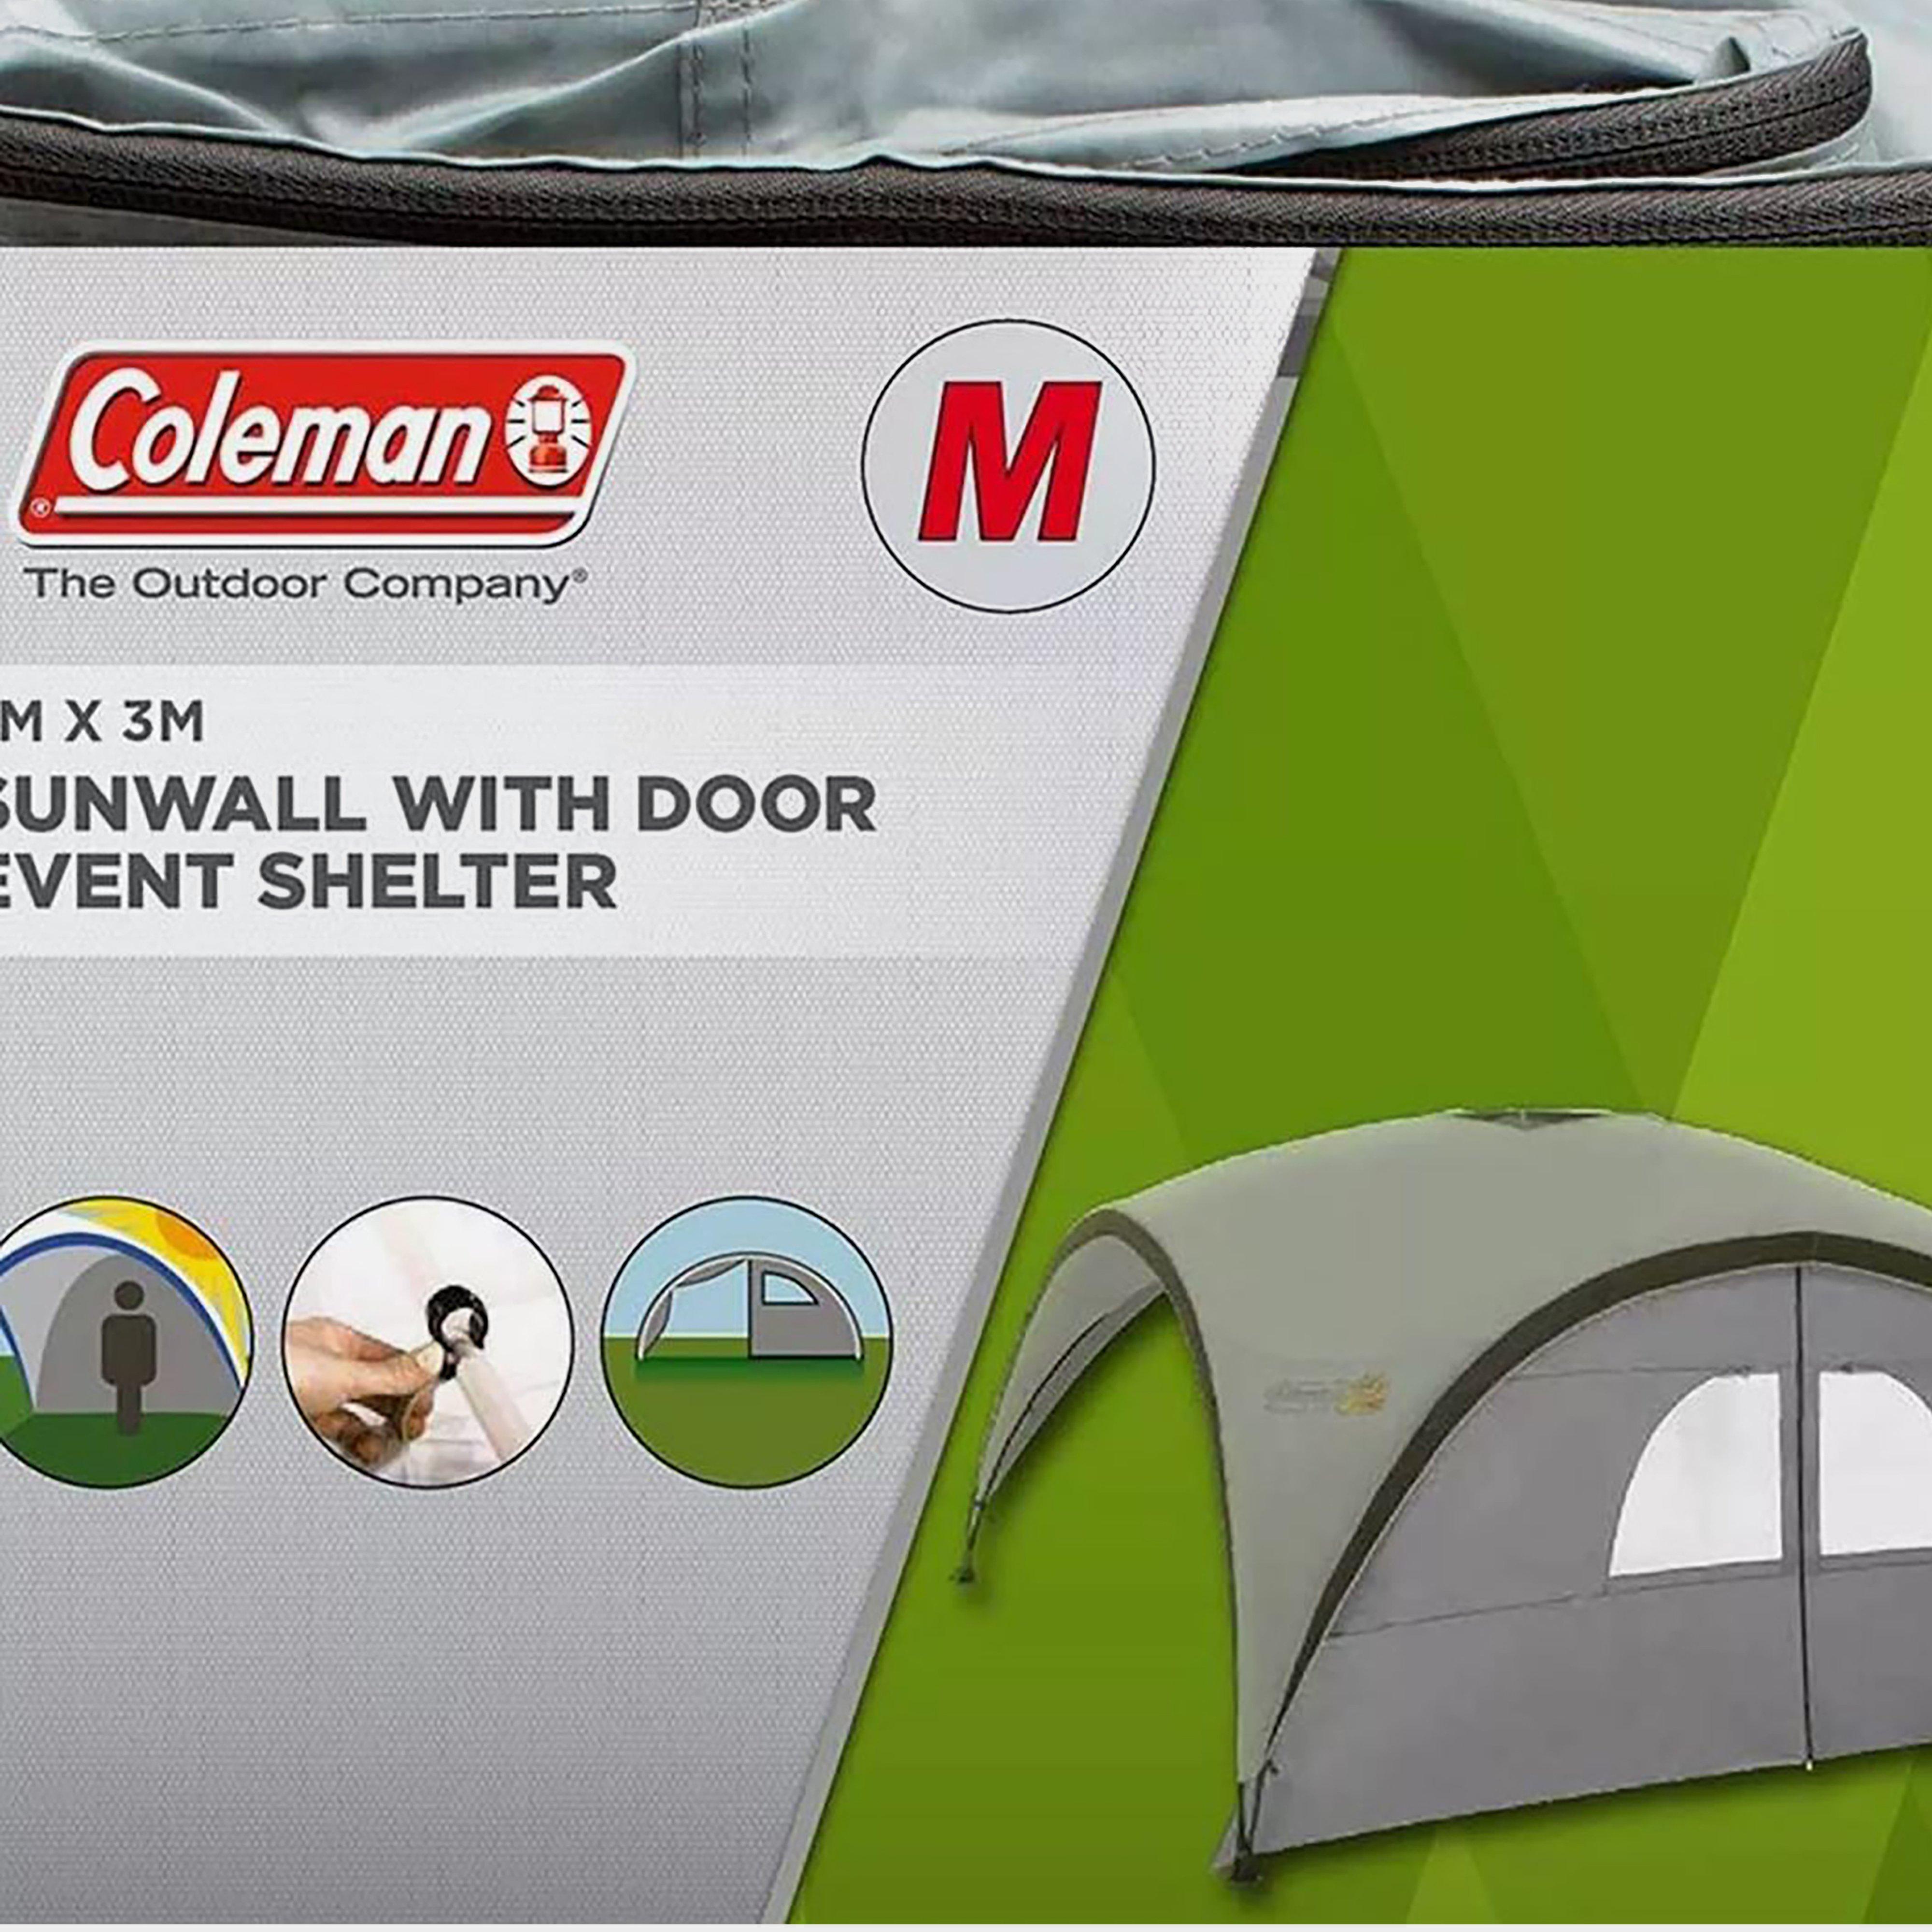 COLEMAN FastPitch Event Shelter Pro L Sunwall With Door, White